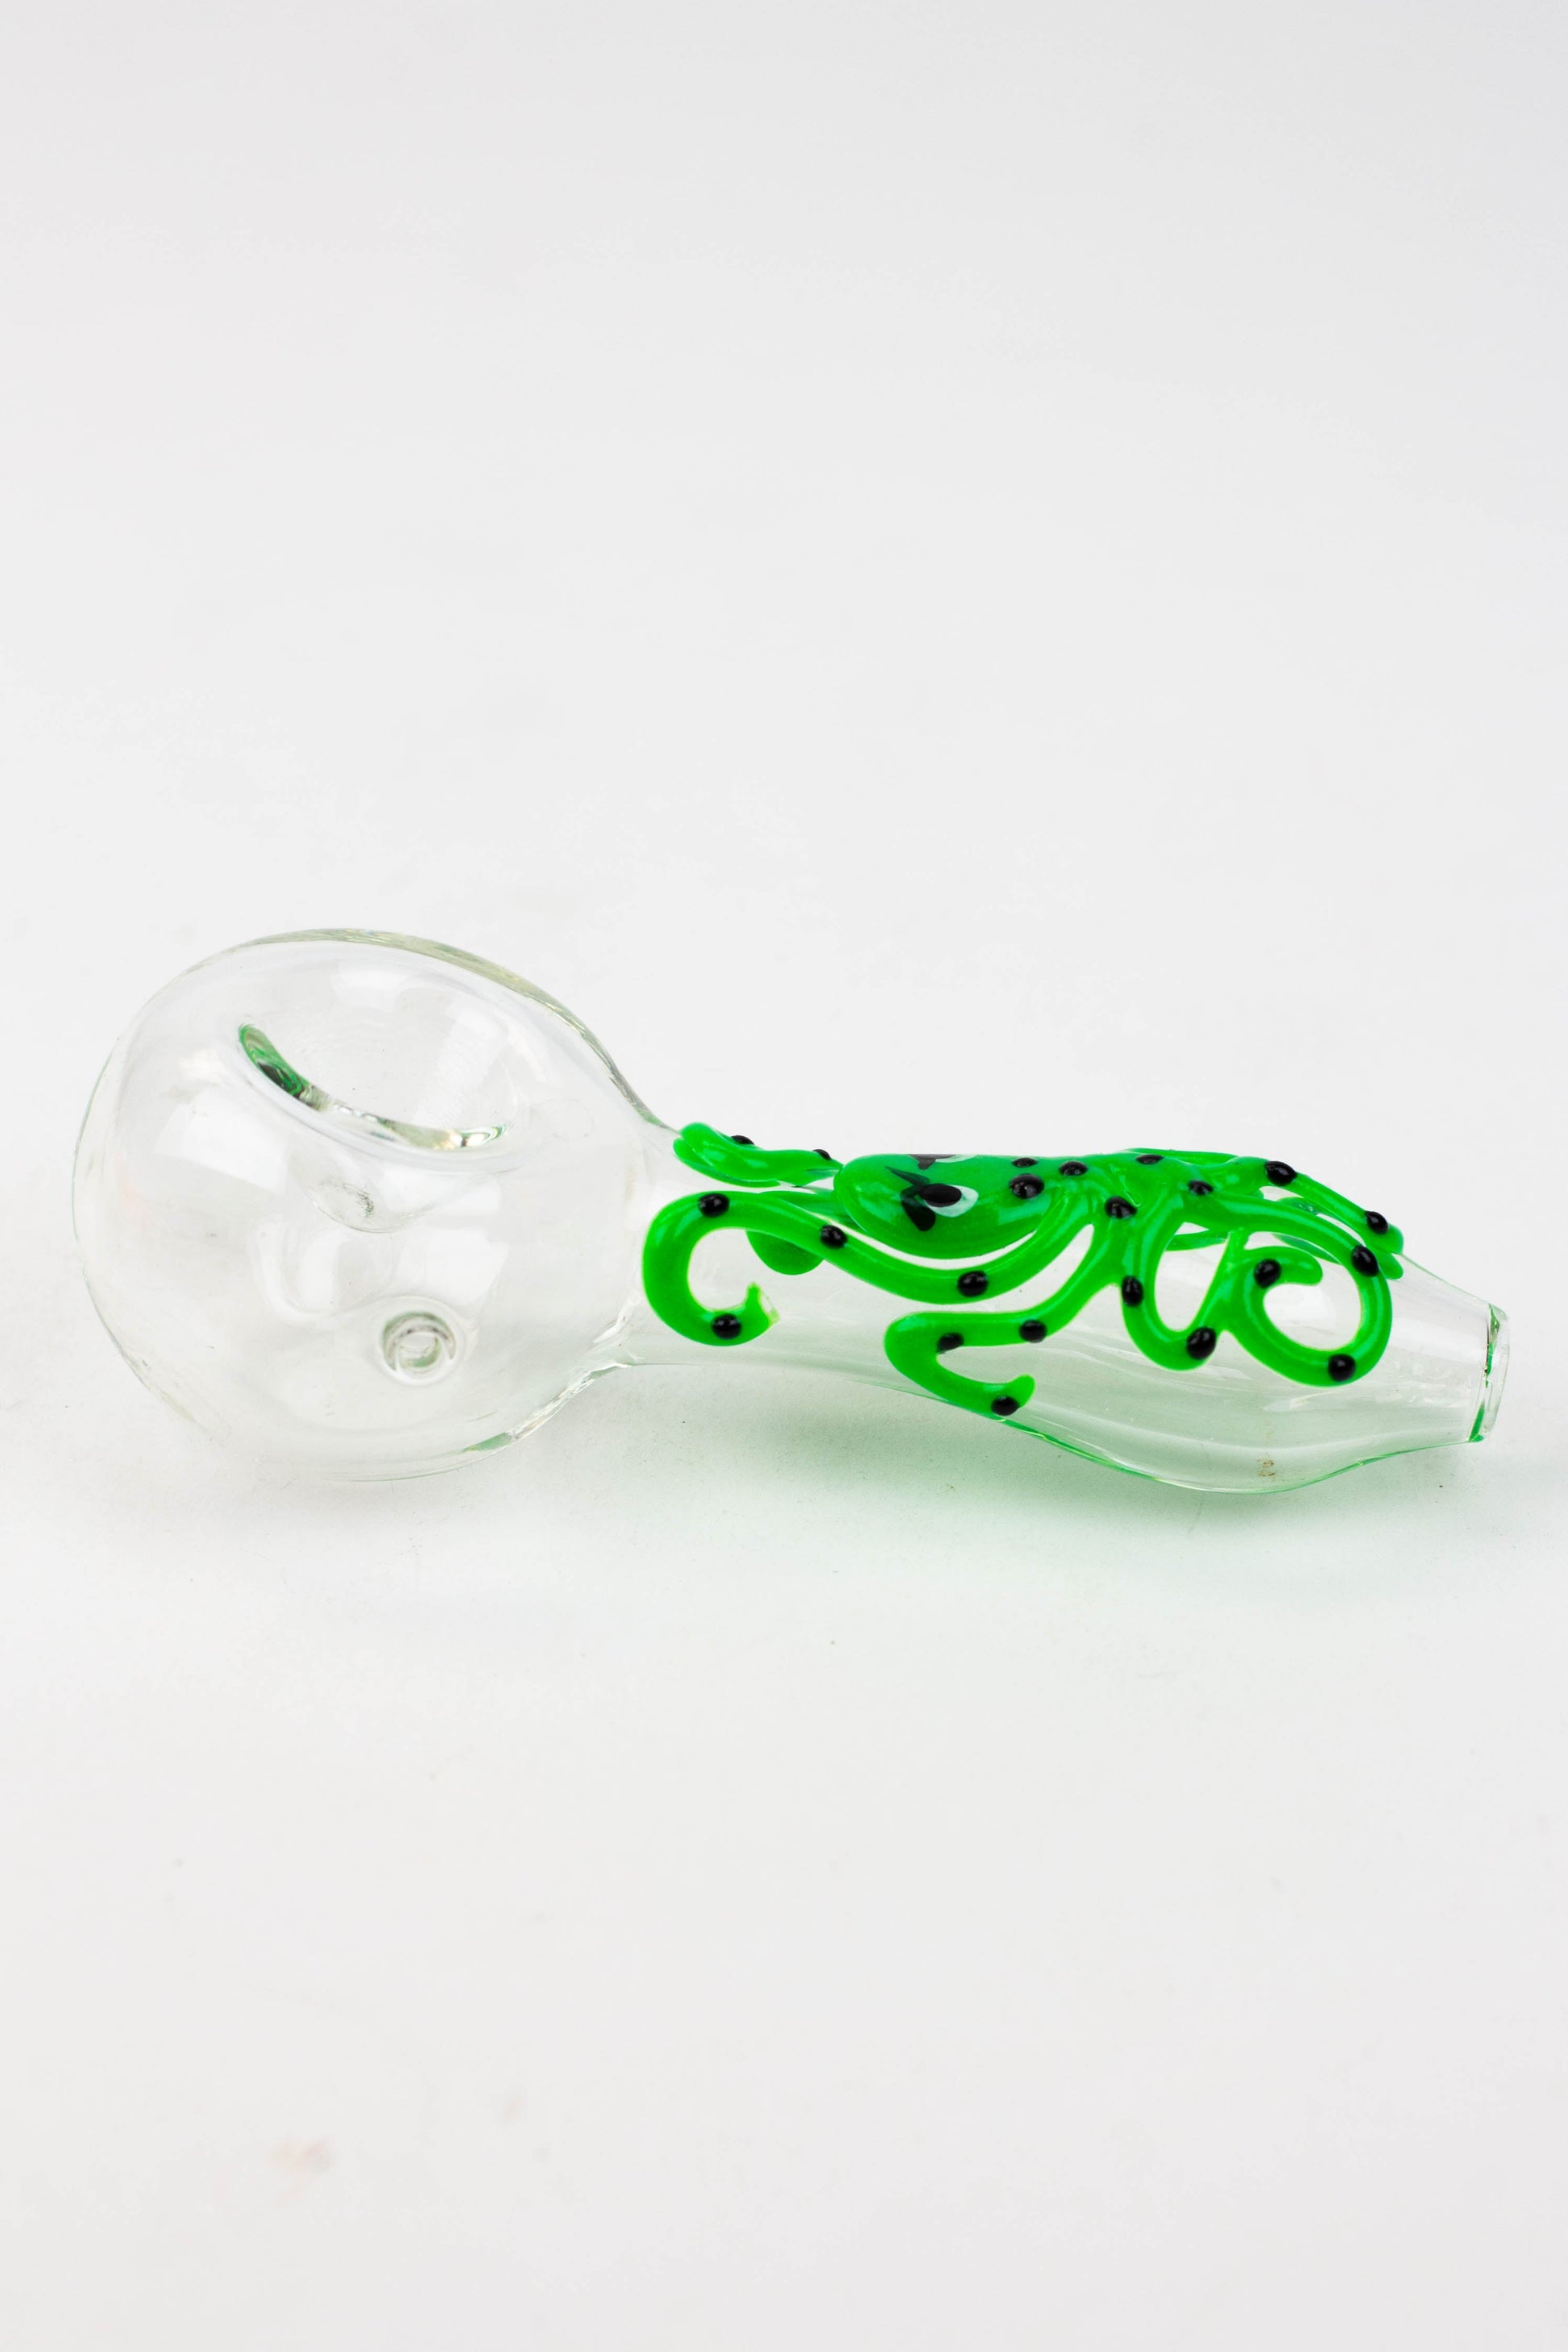 4" GLASS PIPE-Octopus [GHP004]_2